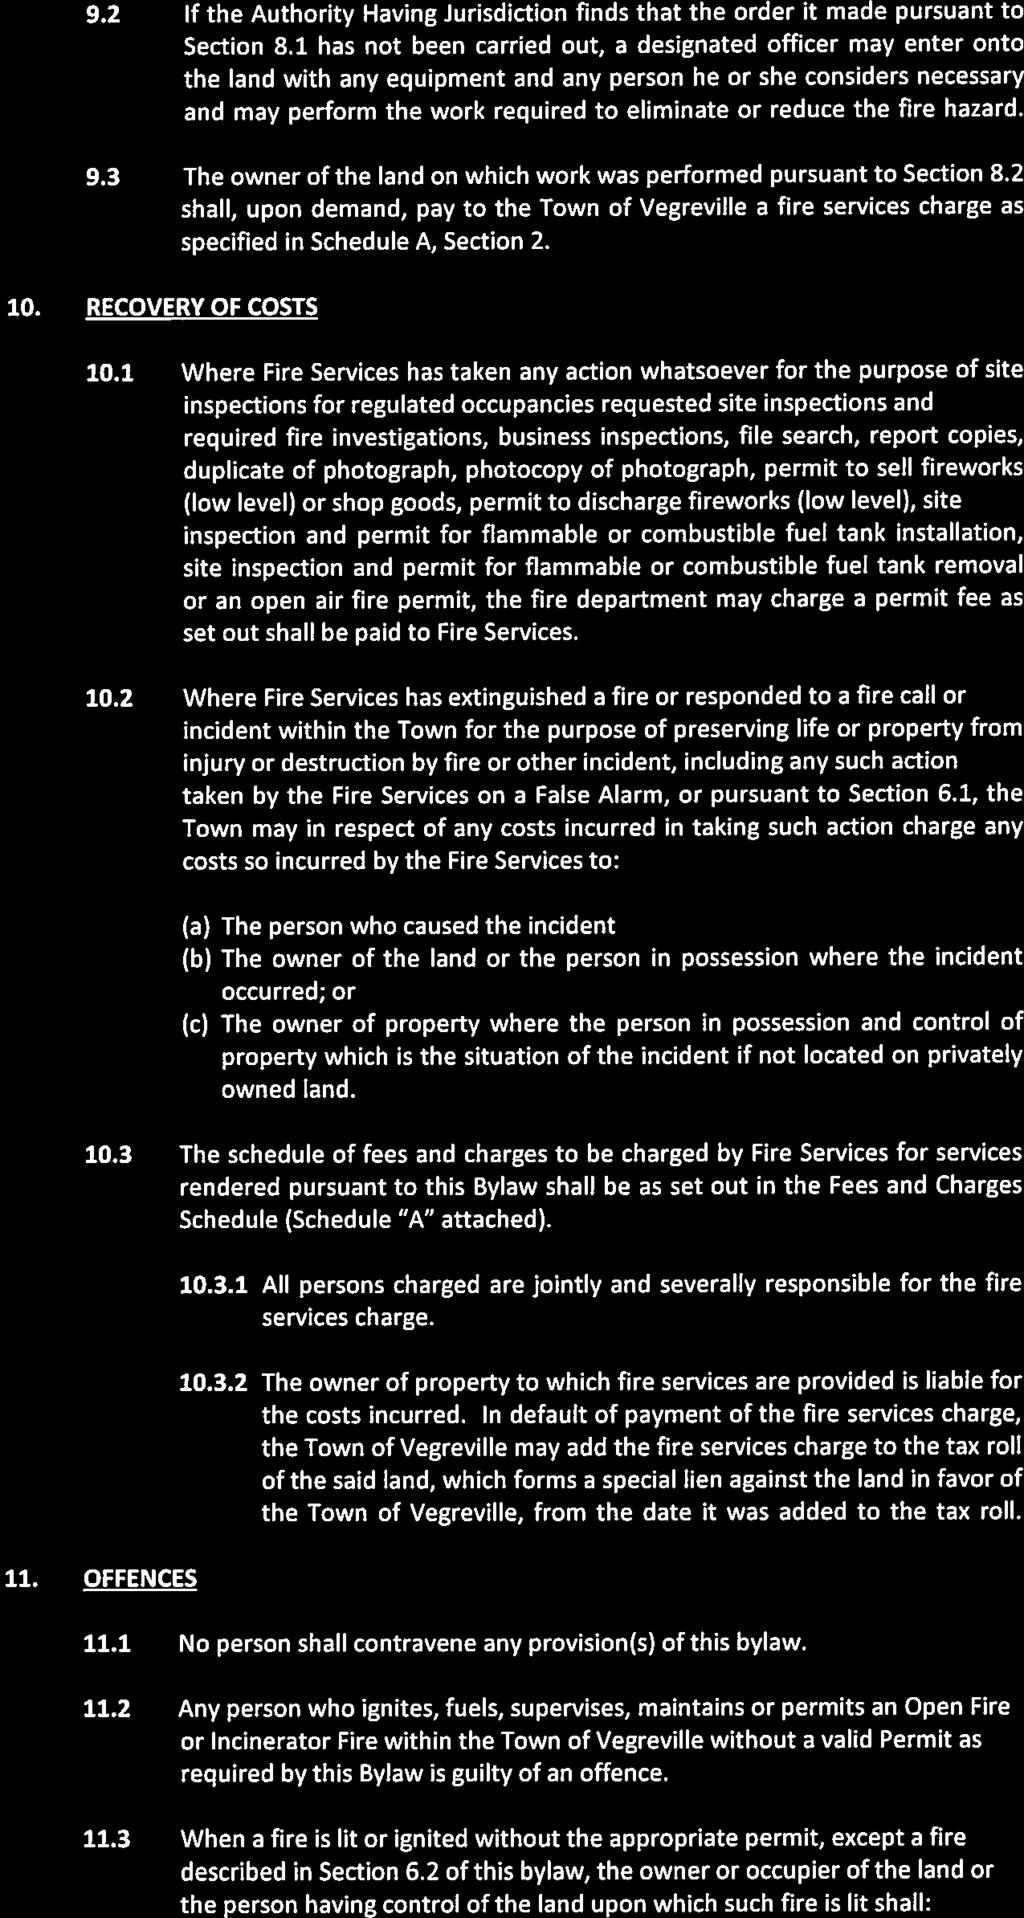 9.2 If the Authority Having Jurisdiction finds that the order it made pursuant to Section 8.